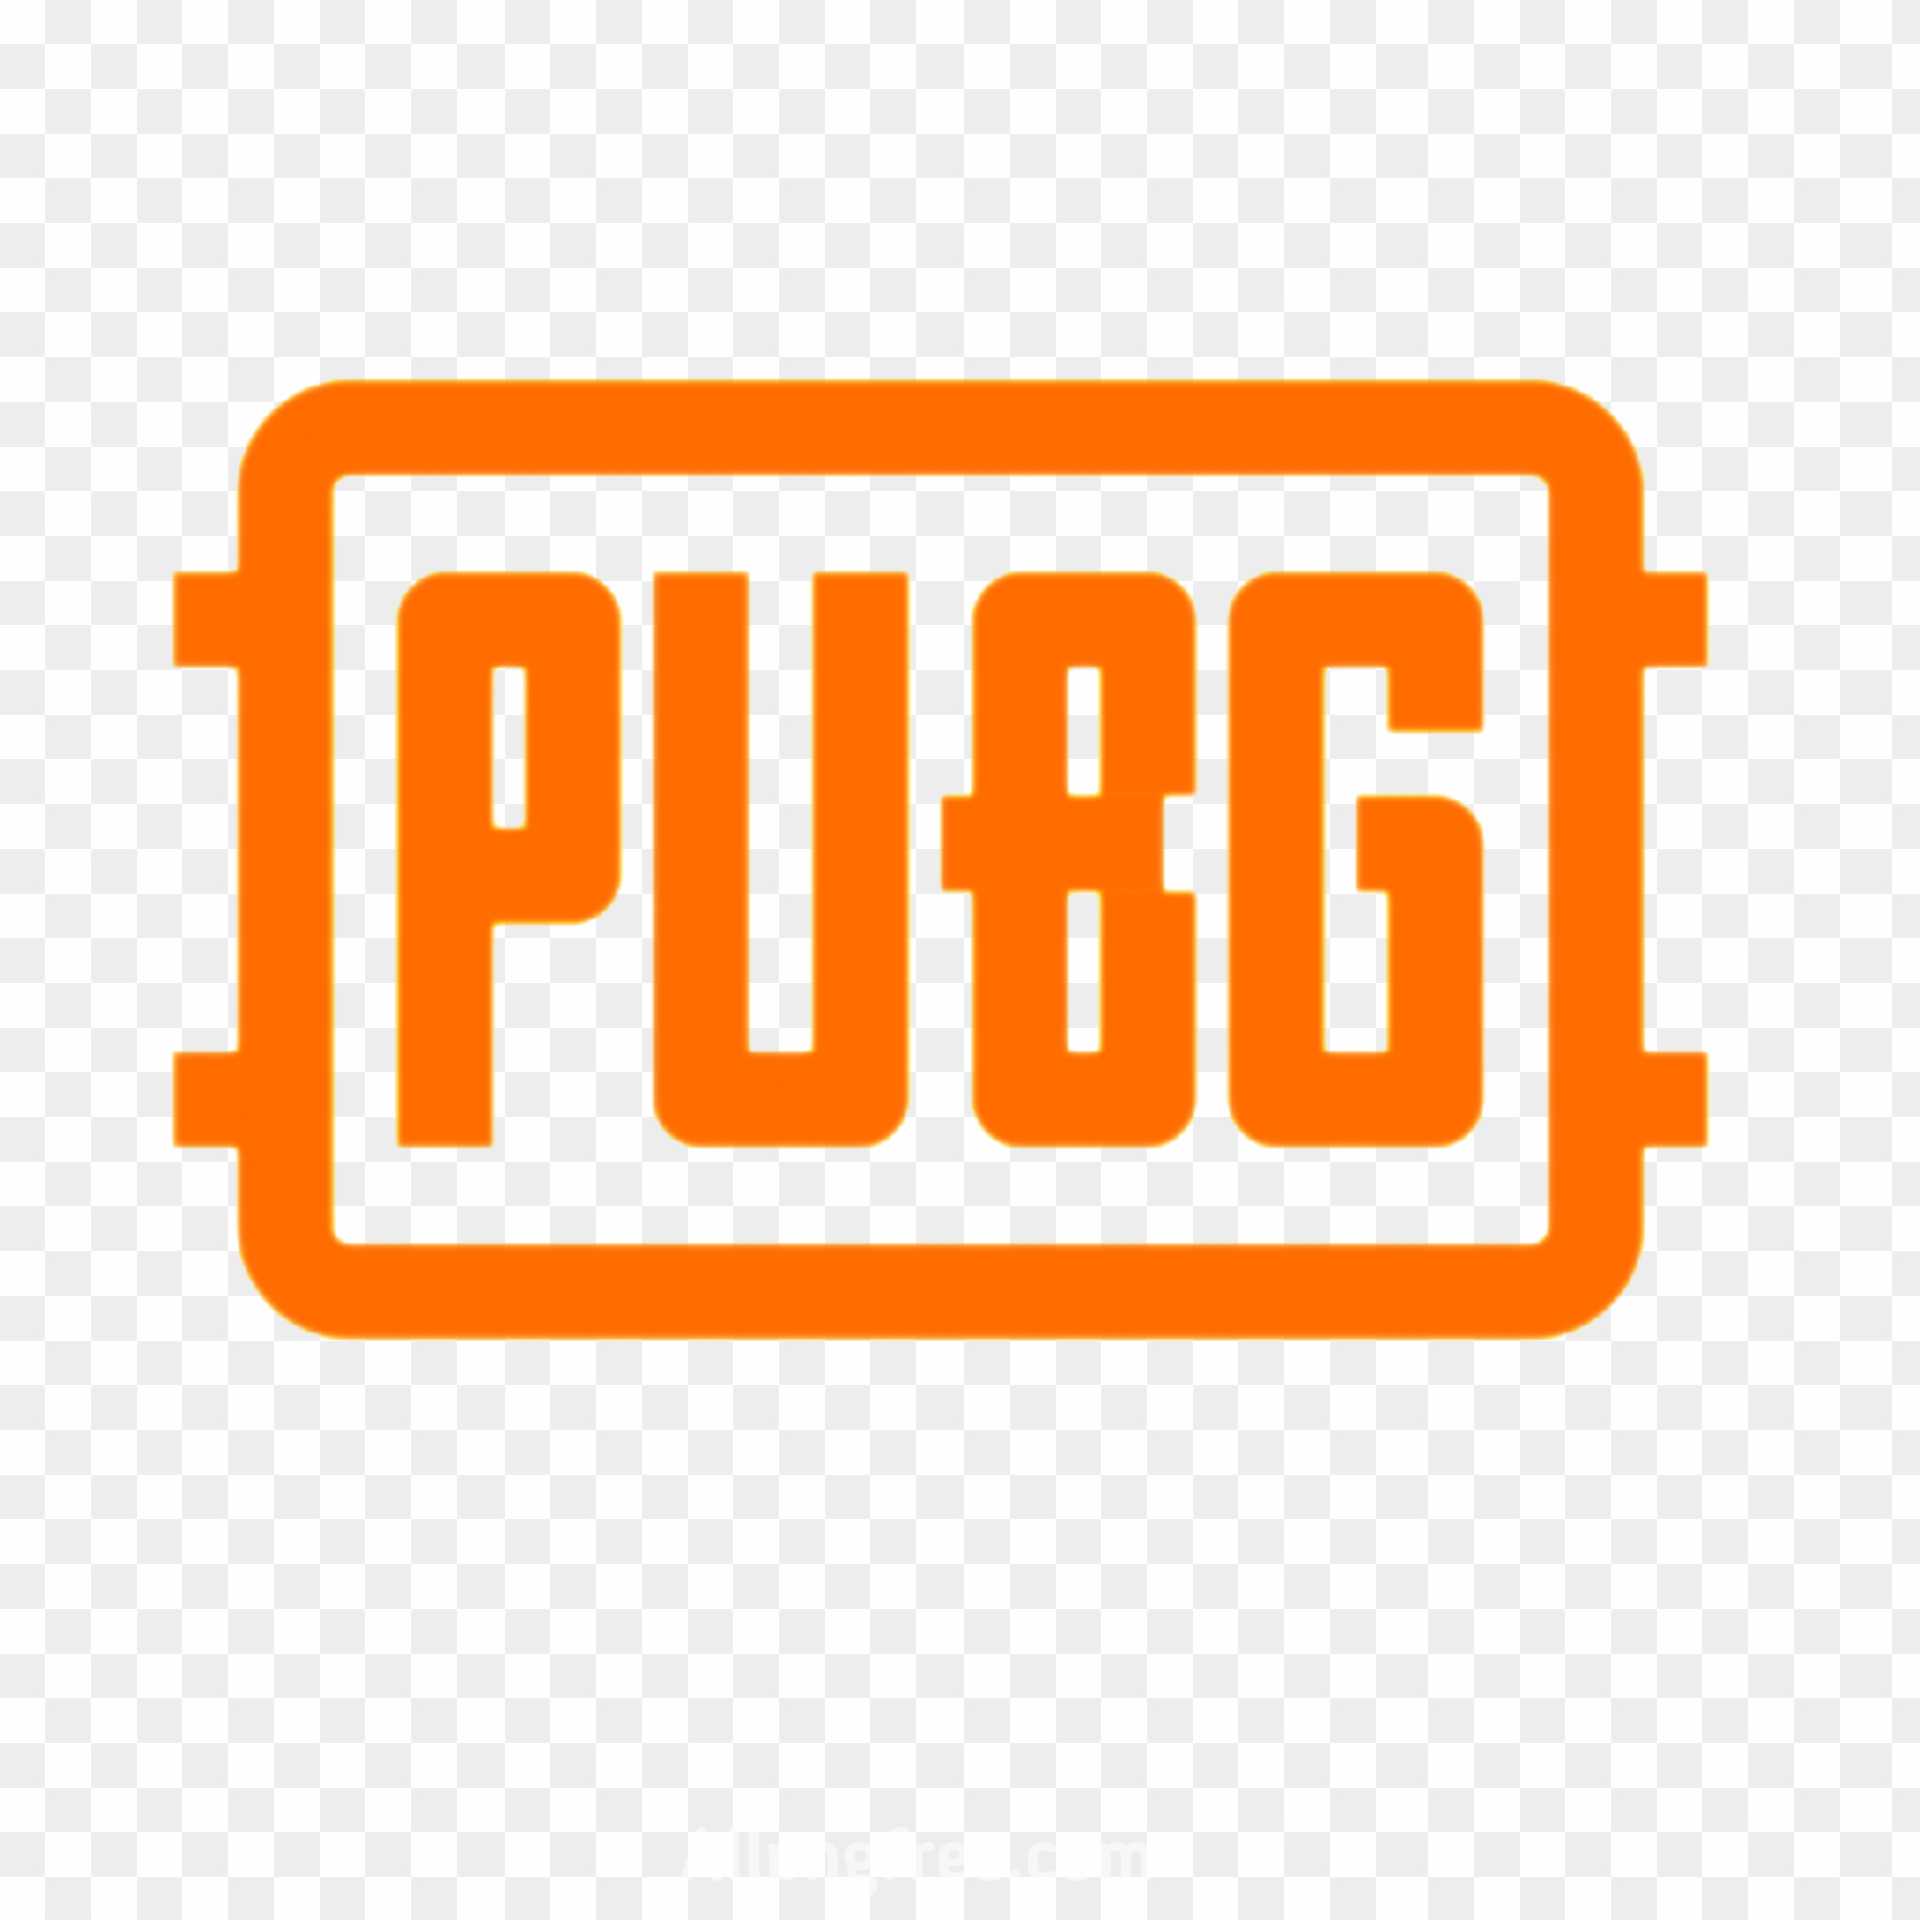 Download Logo - Pubg Logo Png White PNG Image with No Background -  PNGkey.com